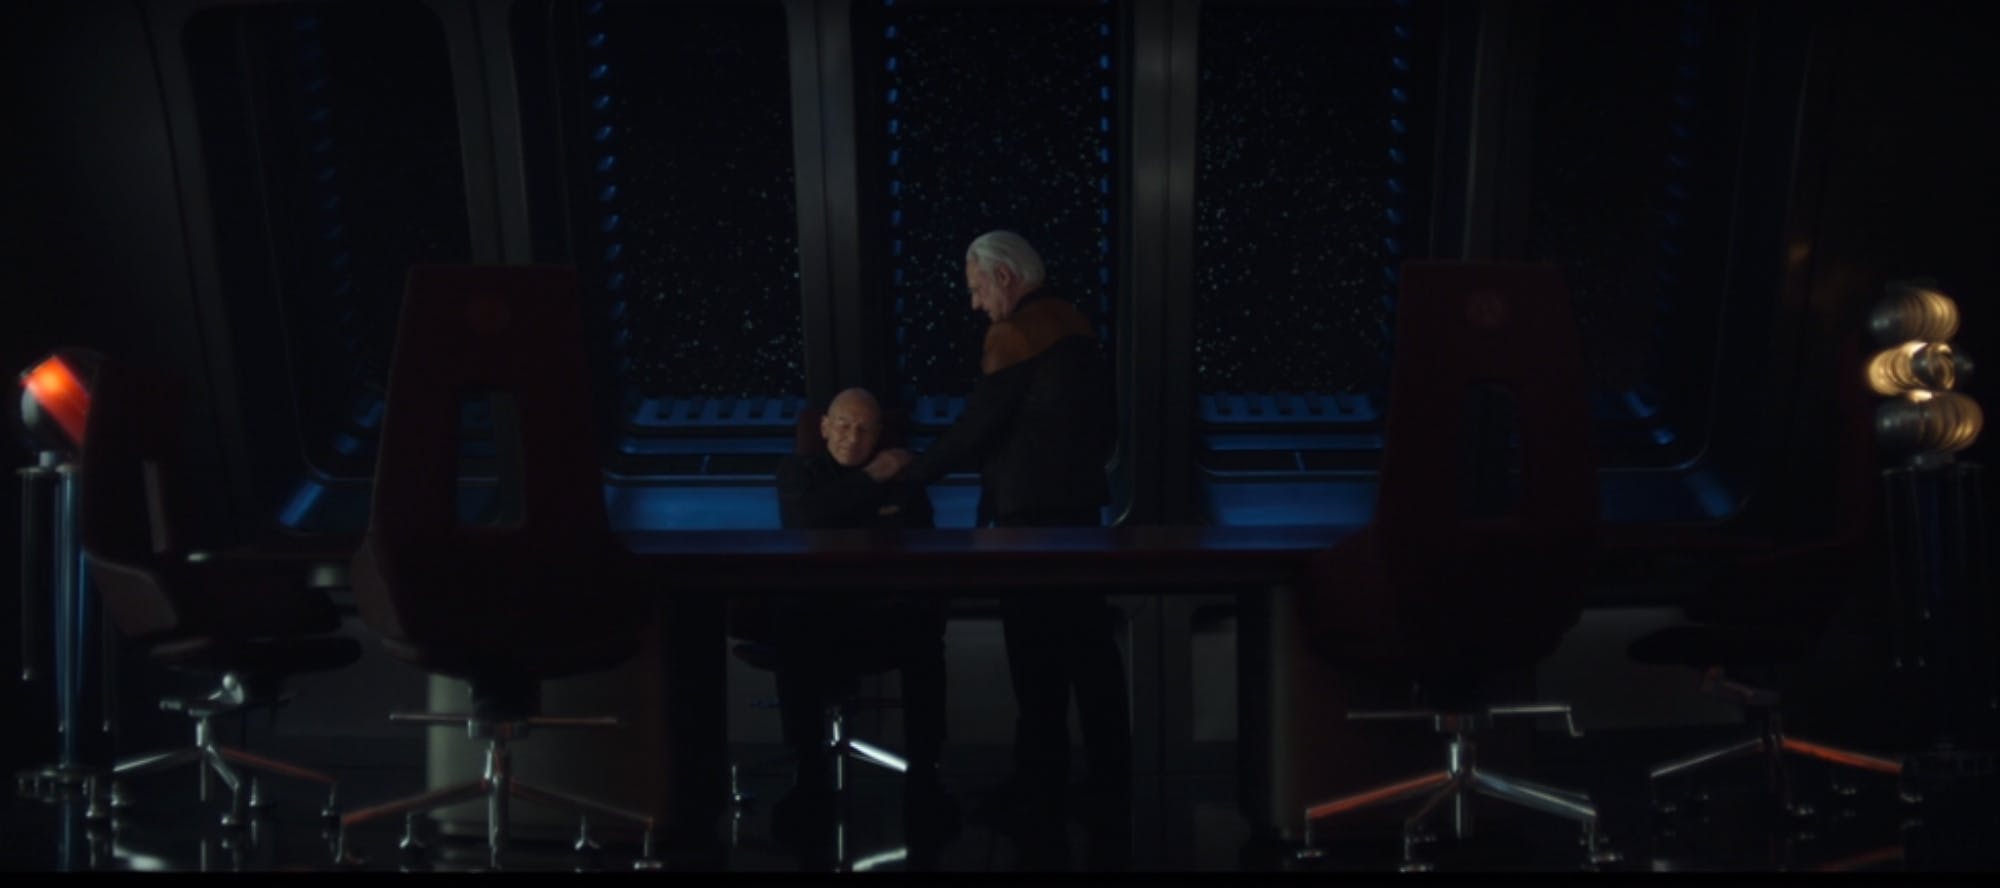 In the Observation Lounge, Data places a comforting hand on Picard's shoulder as he worries in 'Vox'